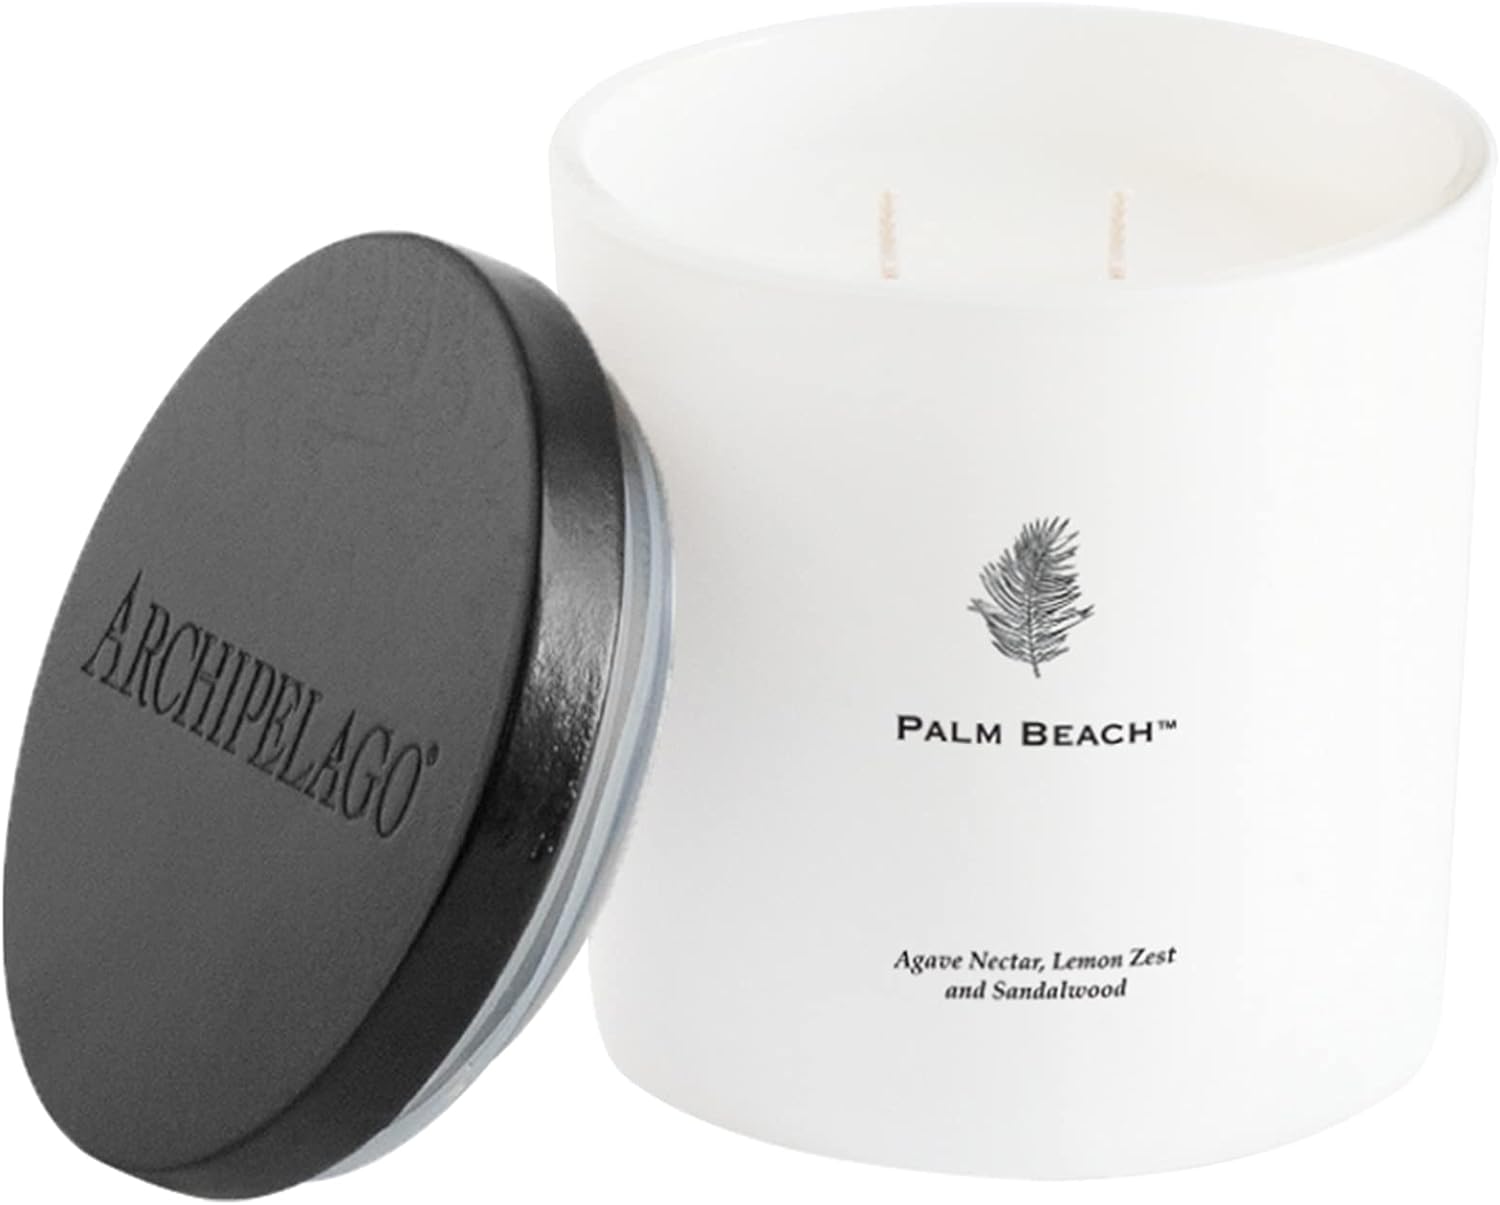 Archipelago Botanicals Palm Beach Luxe Candle | Agave Nectar, Lemon Zest and Sandalwood | Coconut Wax Blend and Double Wicks | Burns Approx. 100 Hours (13 oz)